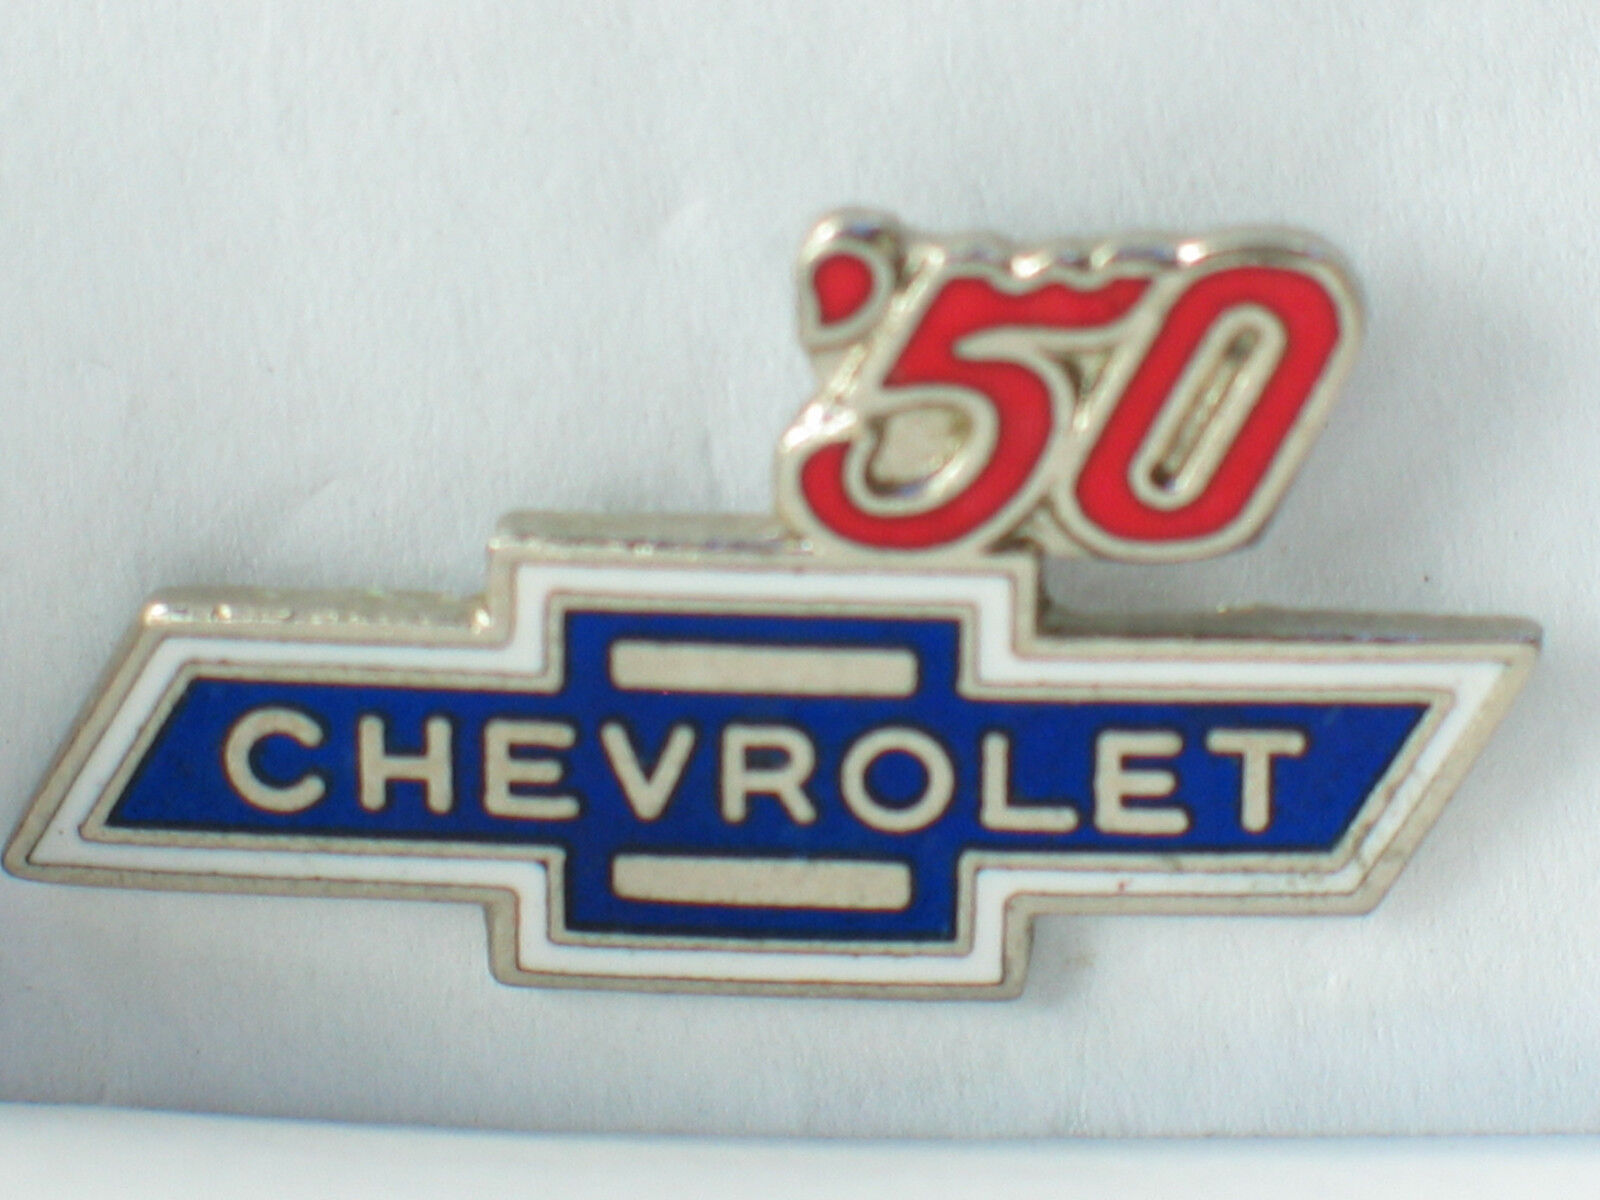 1950 Chevrolet Pin , 42 Chevy Auto Lapel Pin vintage Hat Tack